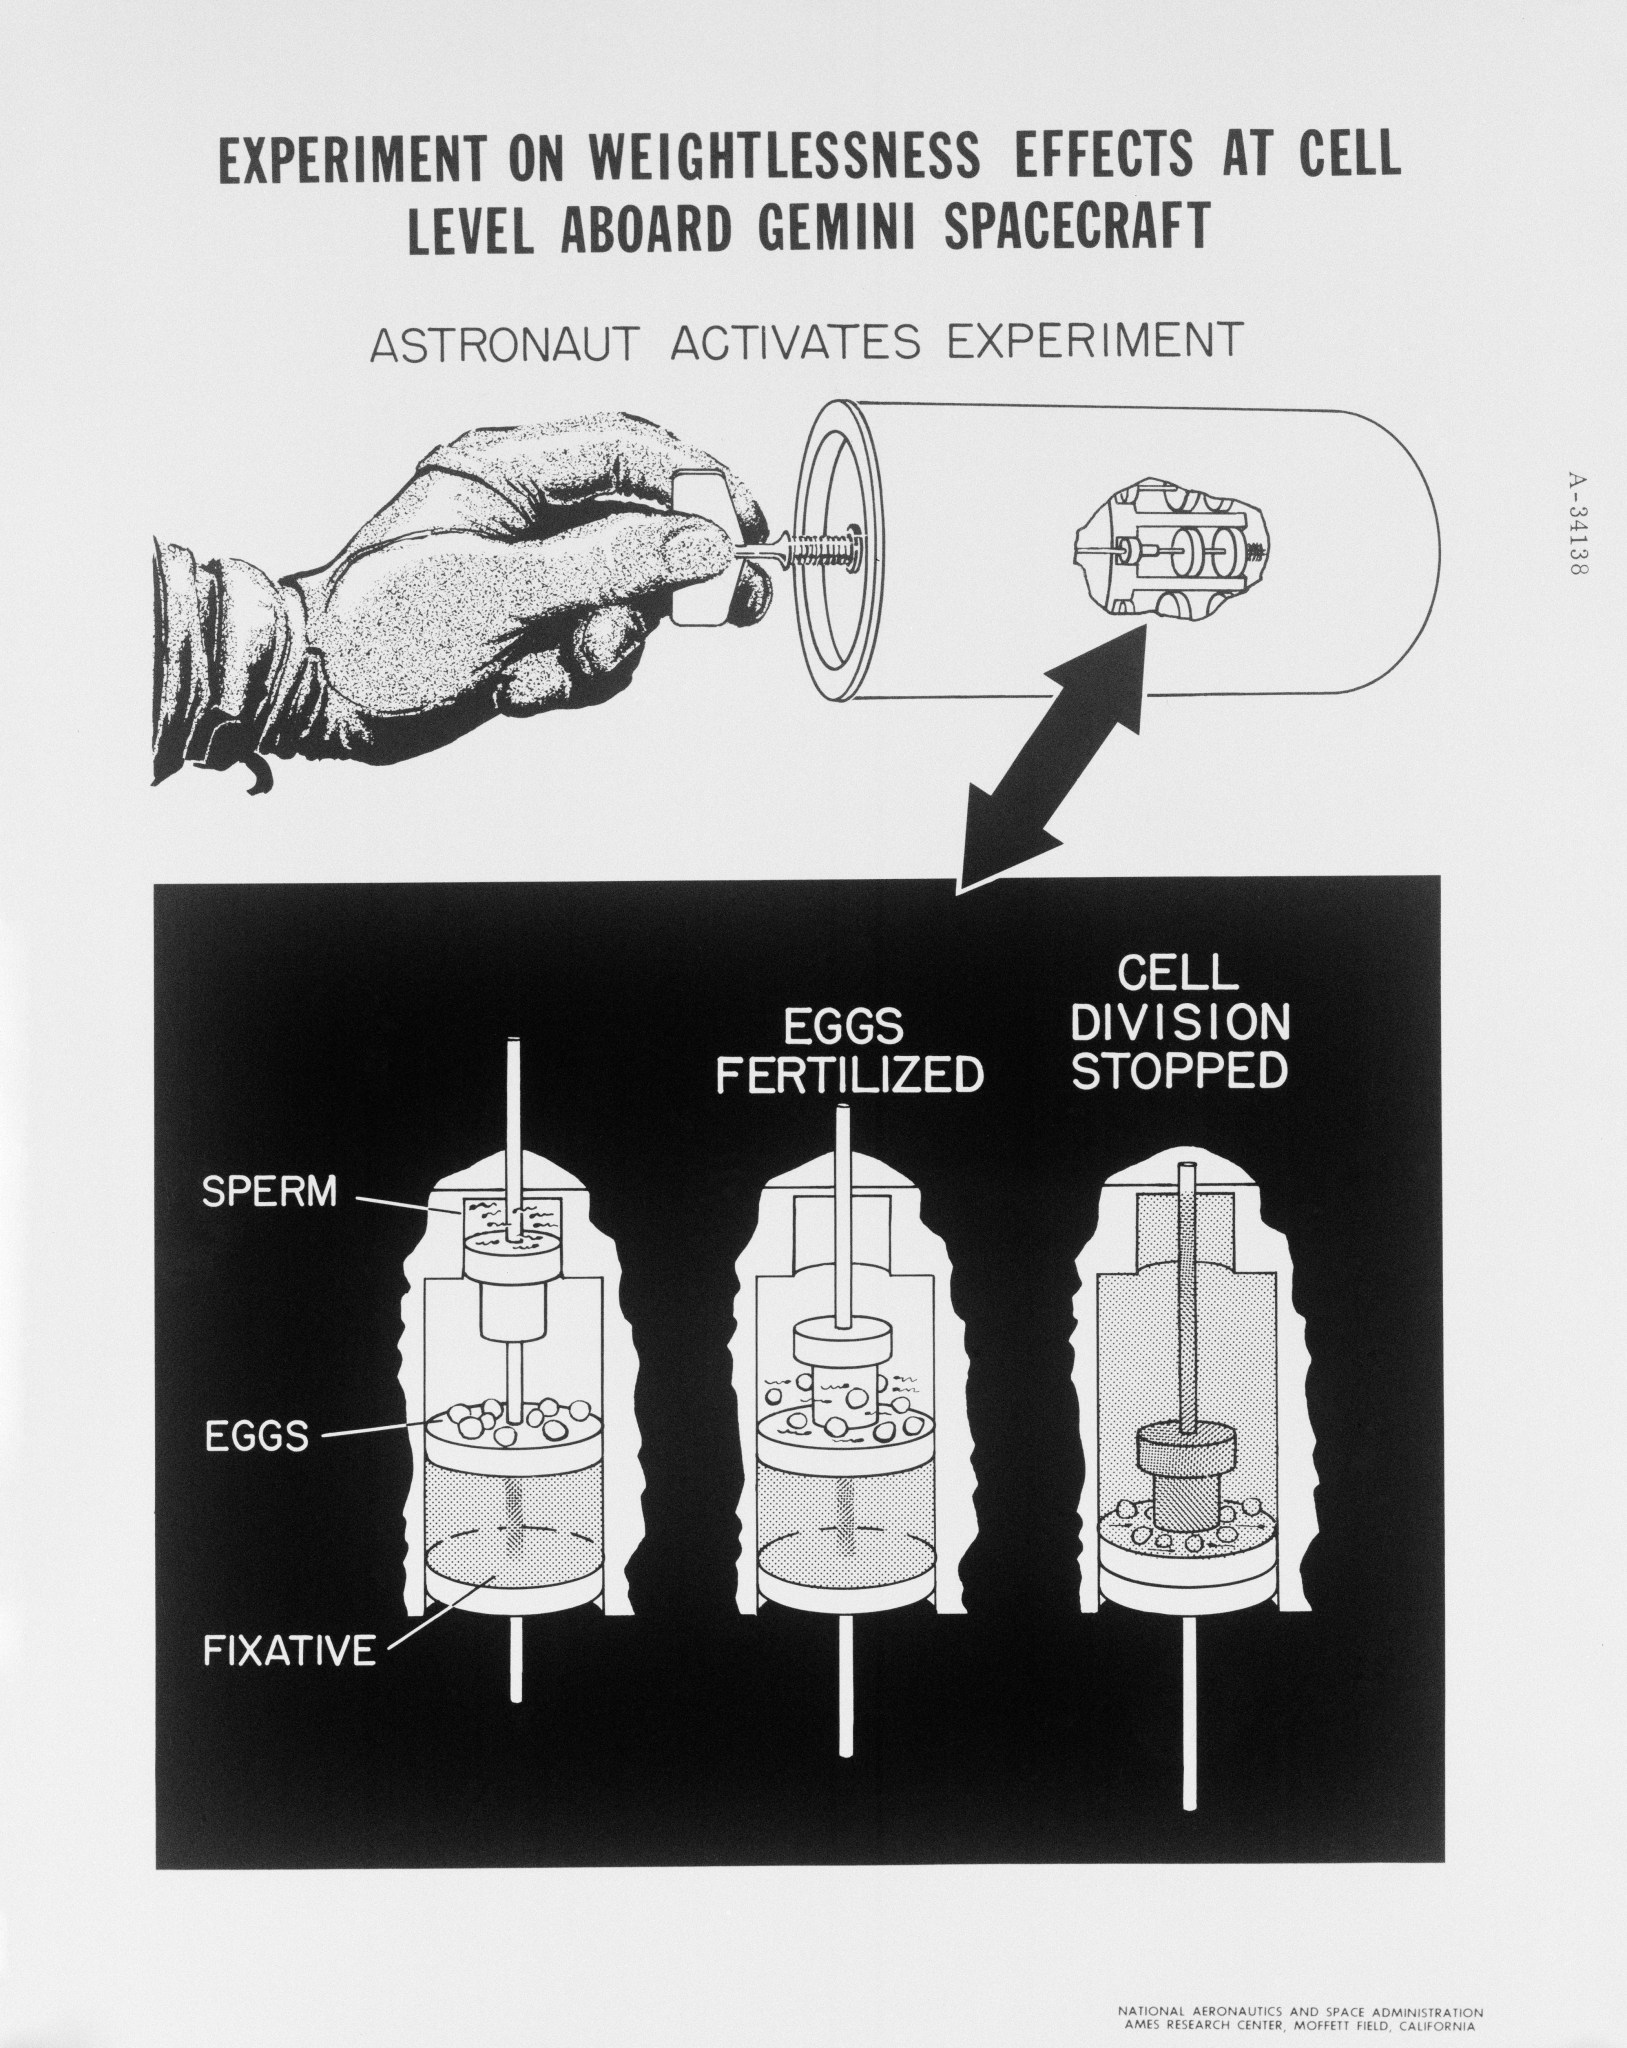 A diagram showing the operation of the Gemini III sea urchin cell division experiment